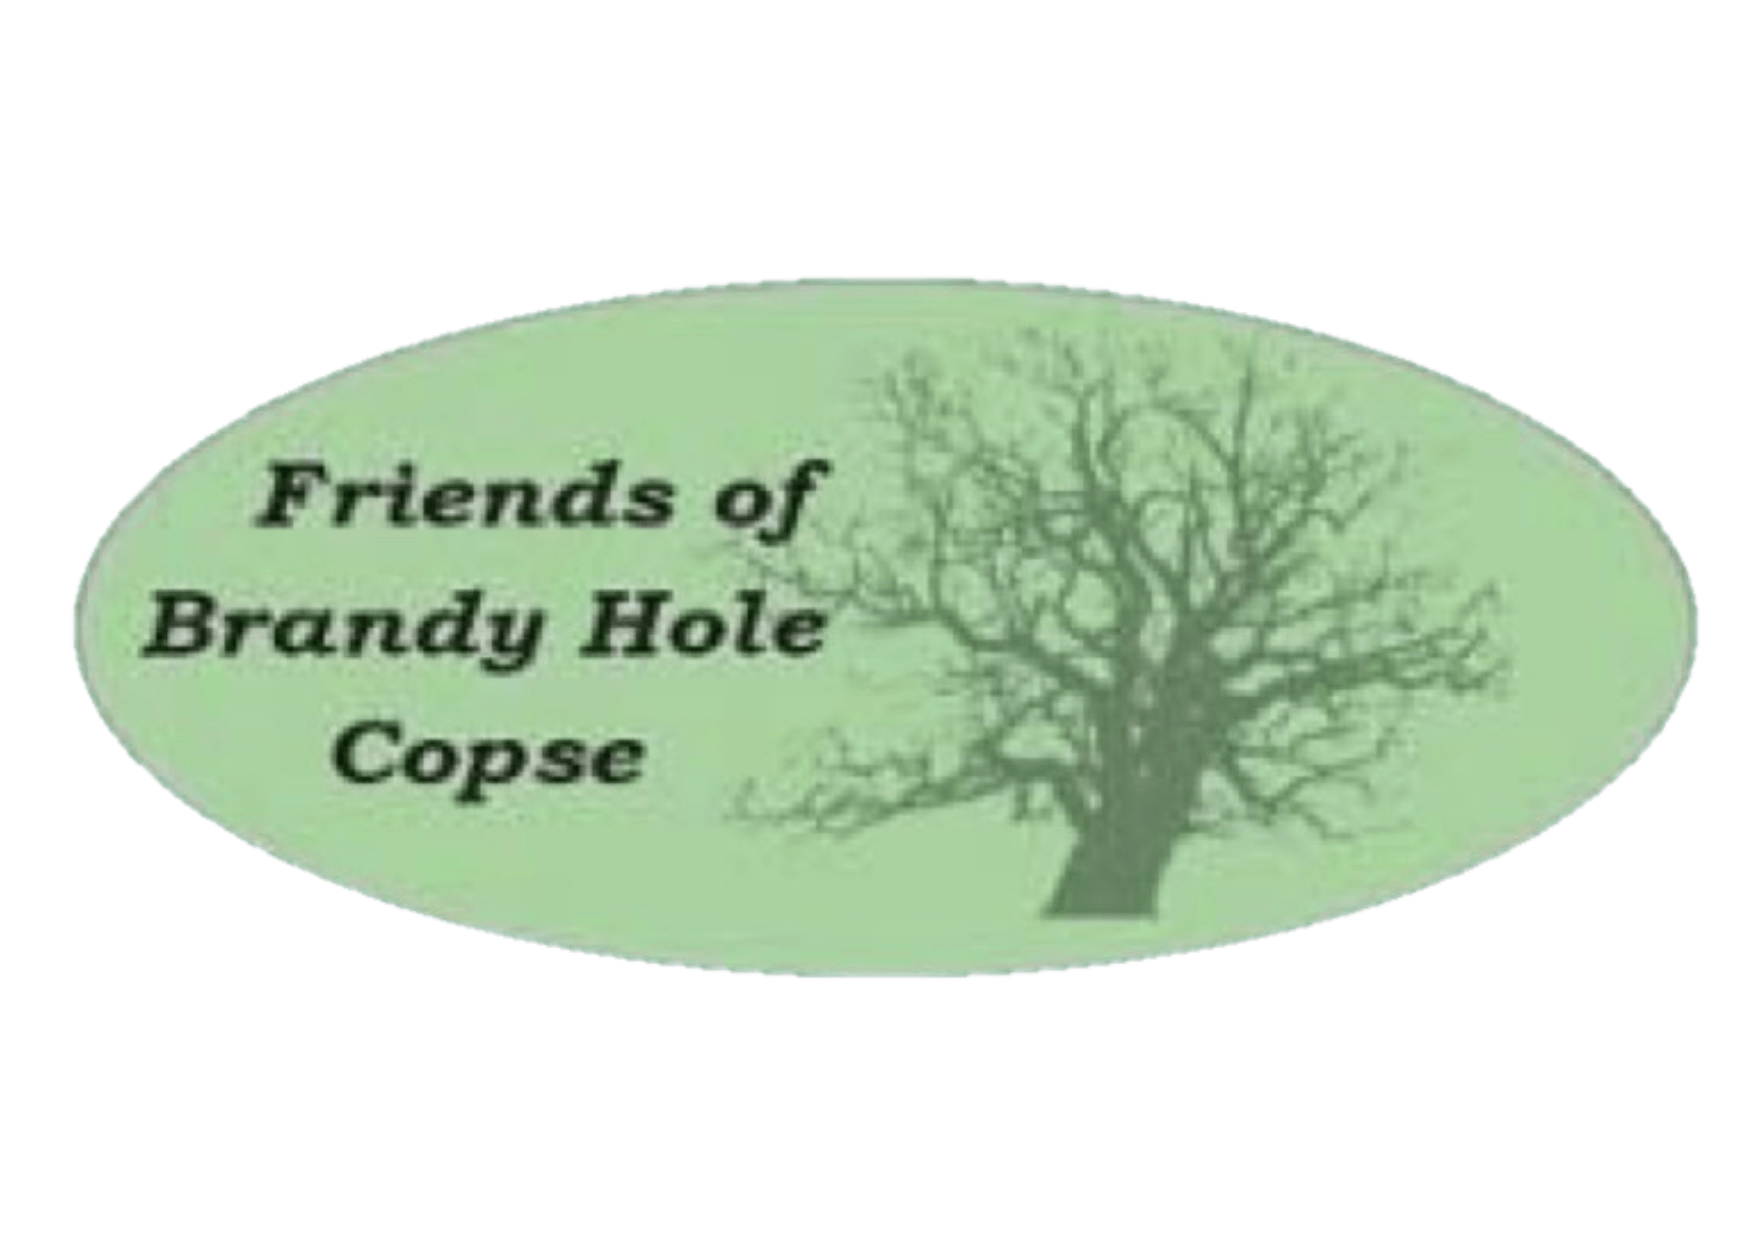 Friends of Brandy Hole Copse logo - words on pale green oval background with silhouette of a tree without leaves